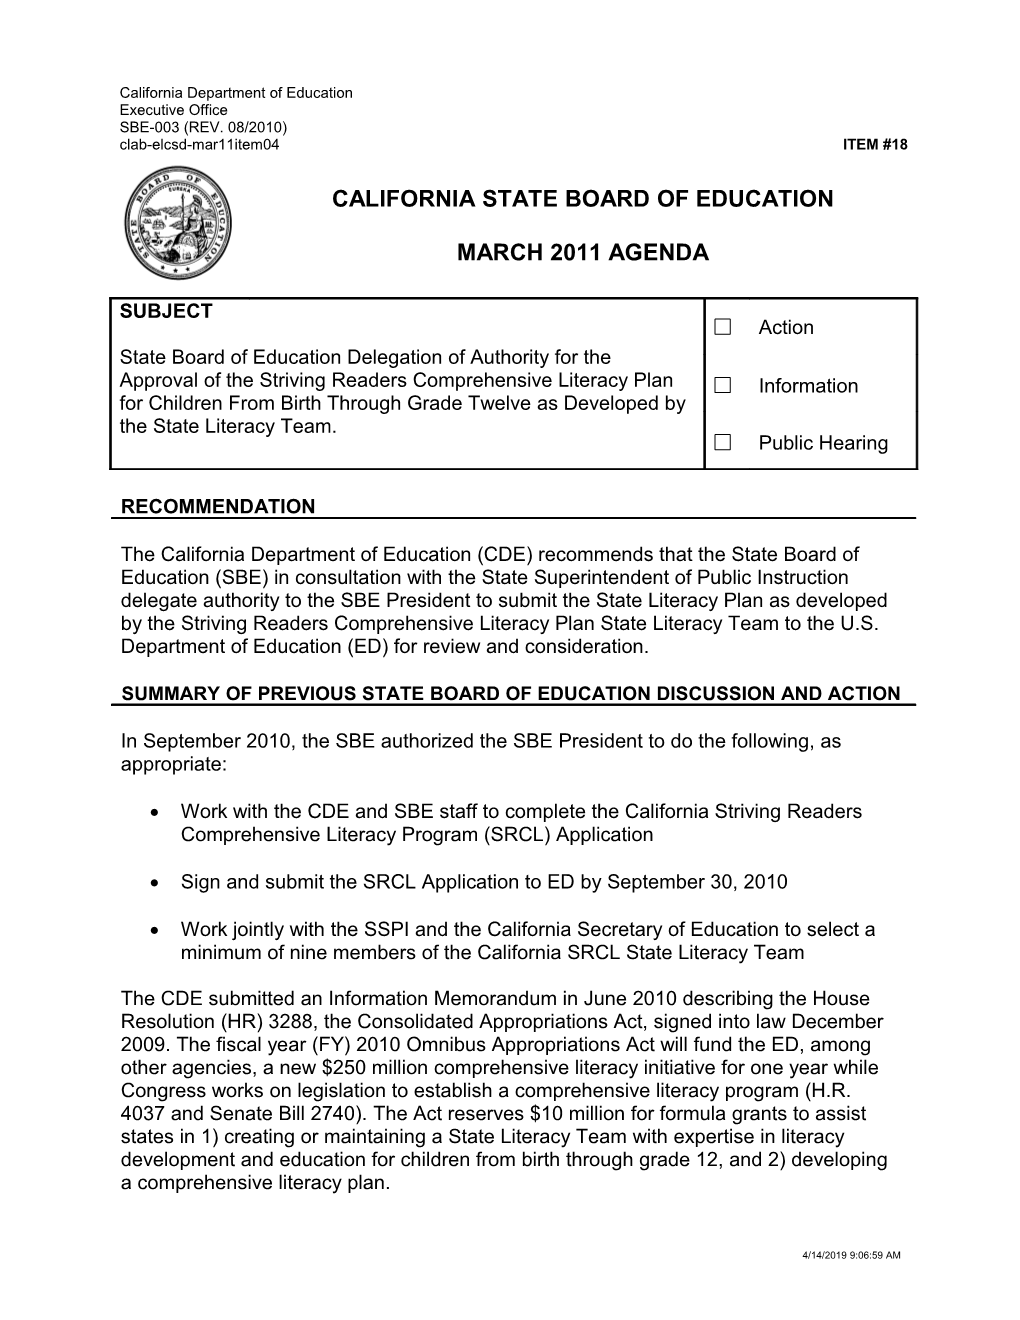 March 2011 Agenda Item 18 - Meeting Agendas (CA State Board of Education)